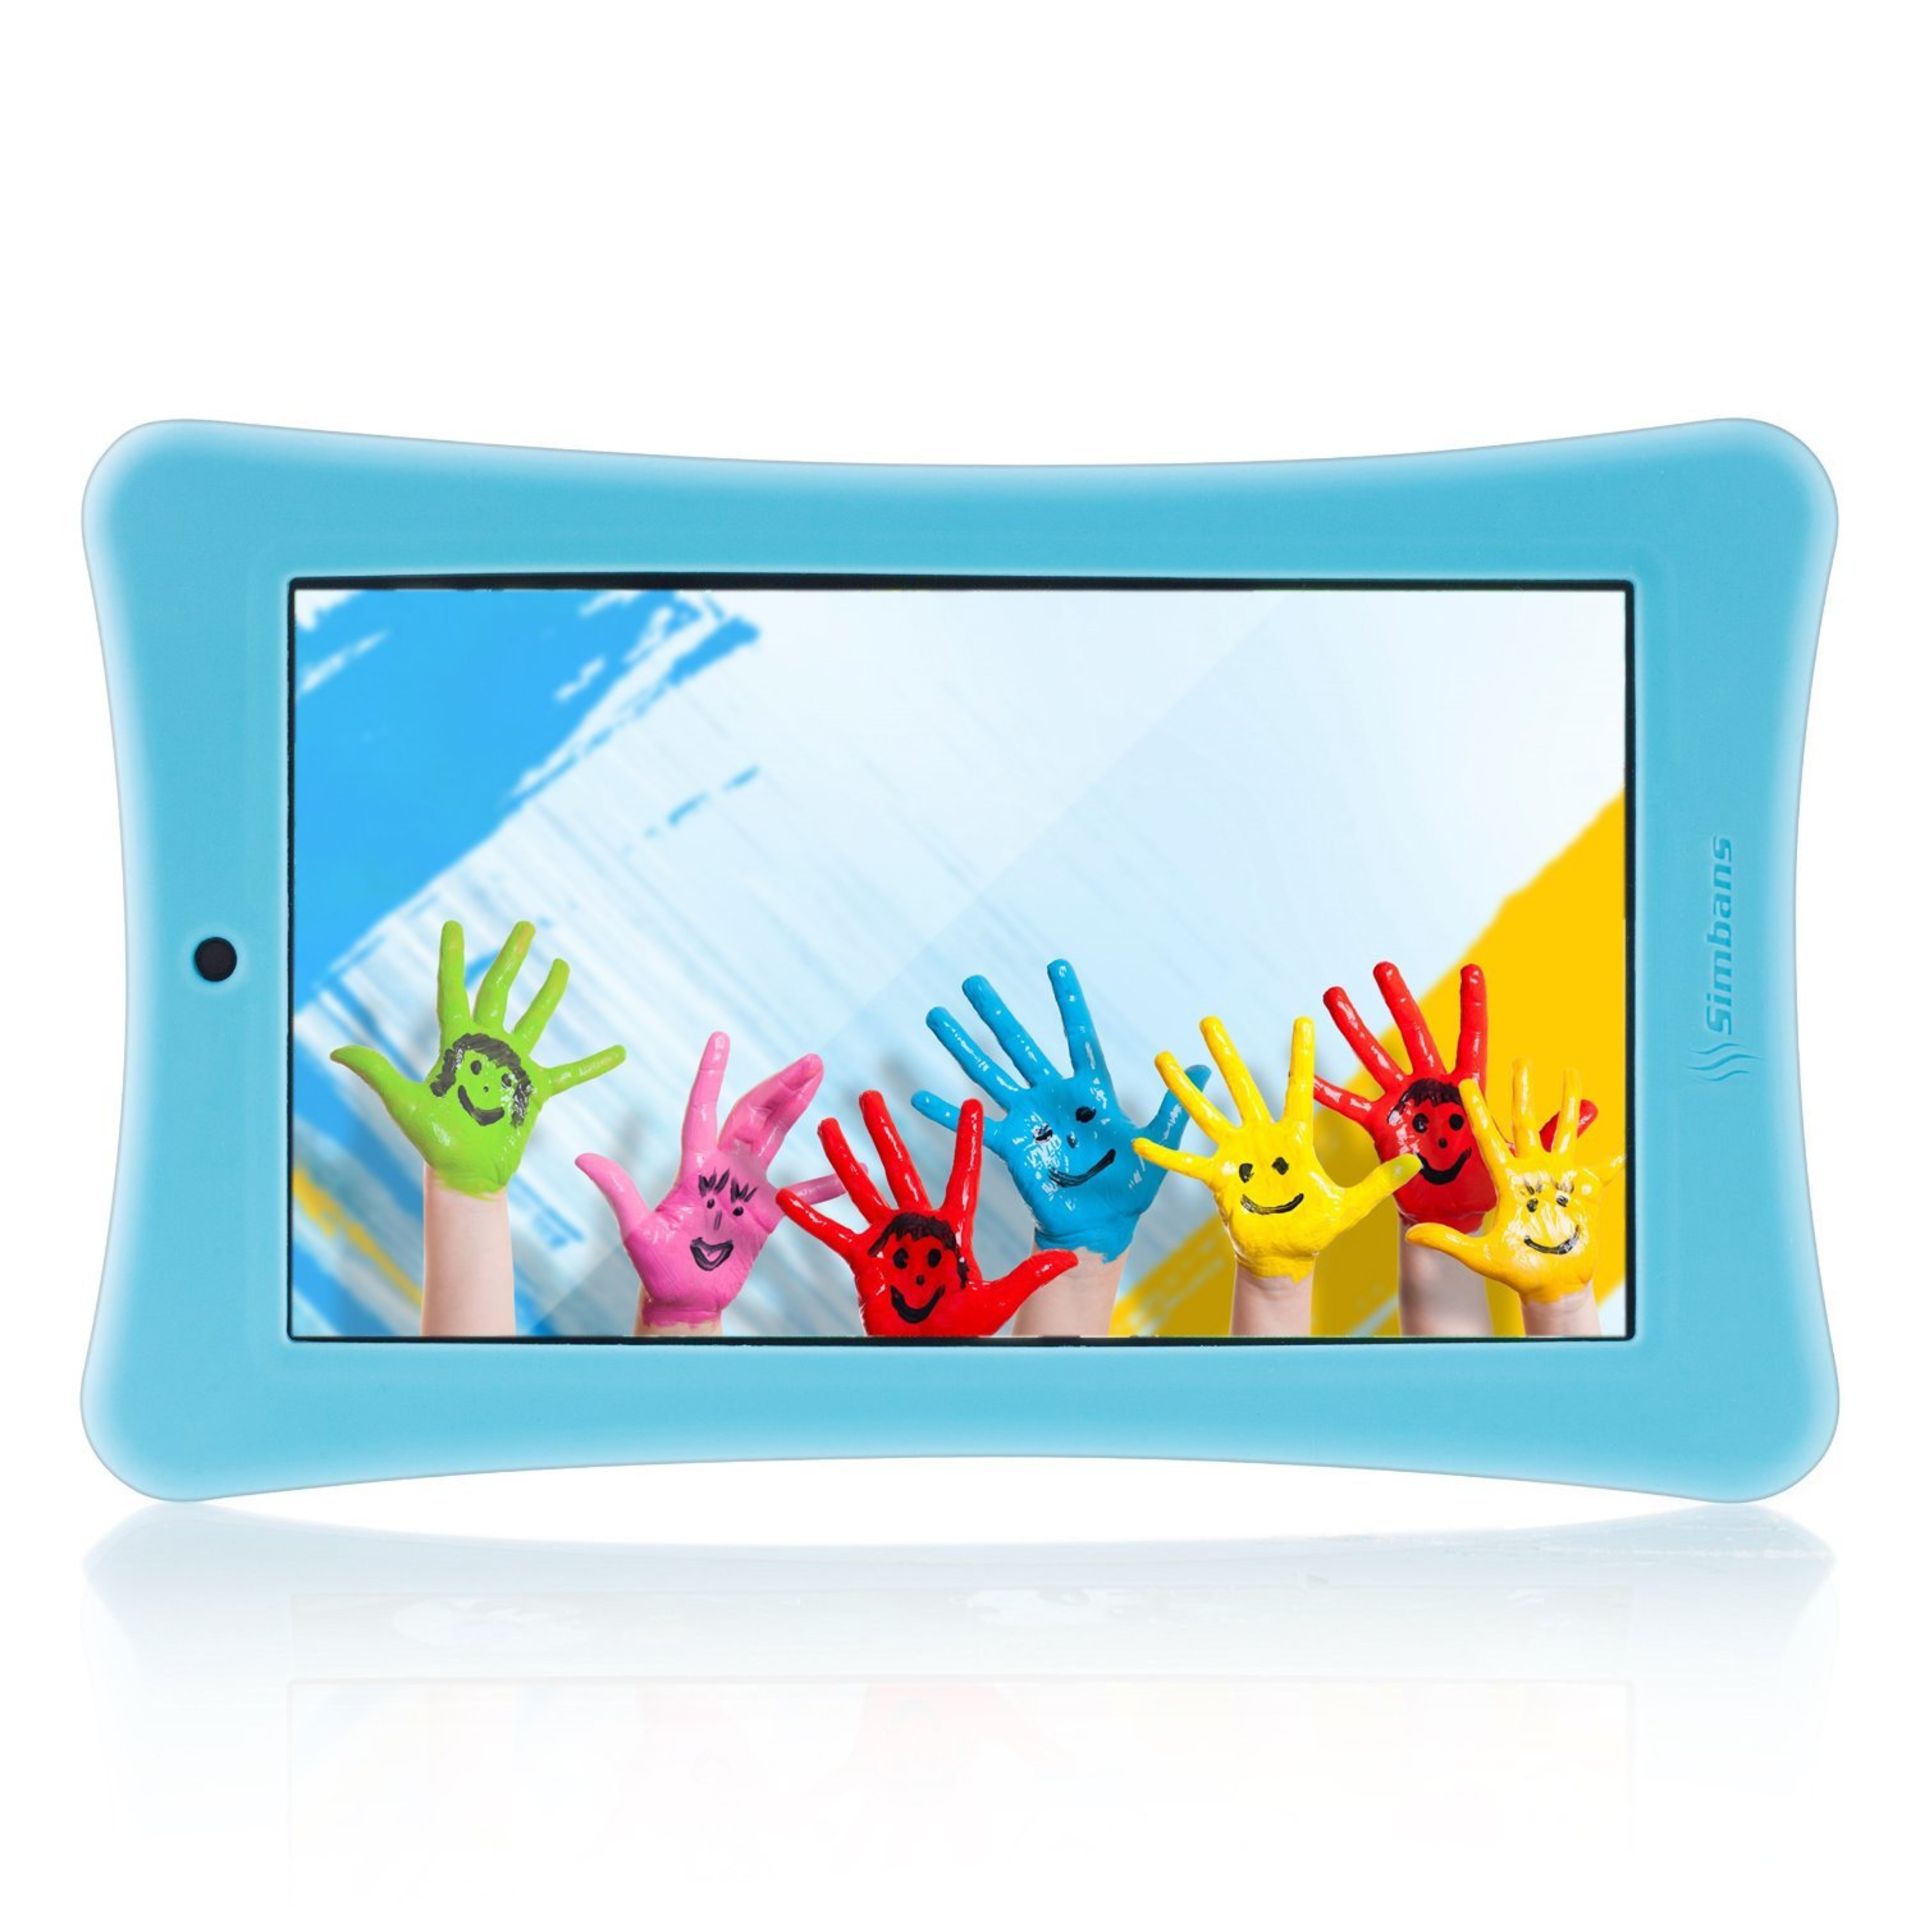 V Brand New Funlet Blue 7 inch Tablet with Protective Case - Tablet sleeve - IPS Screen - 1GB